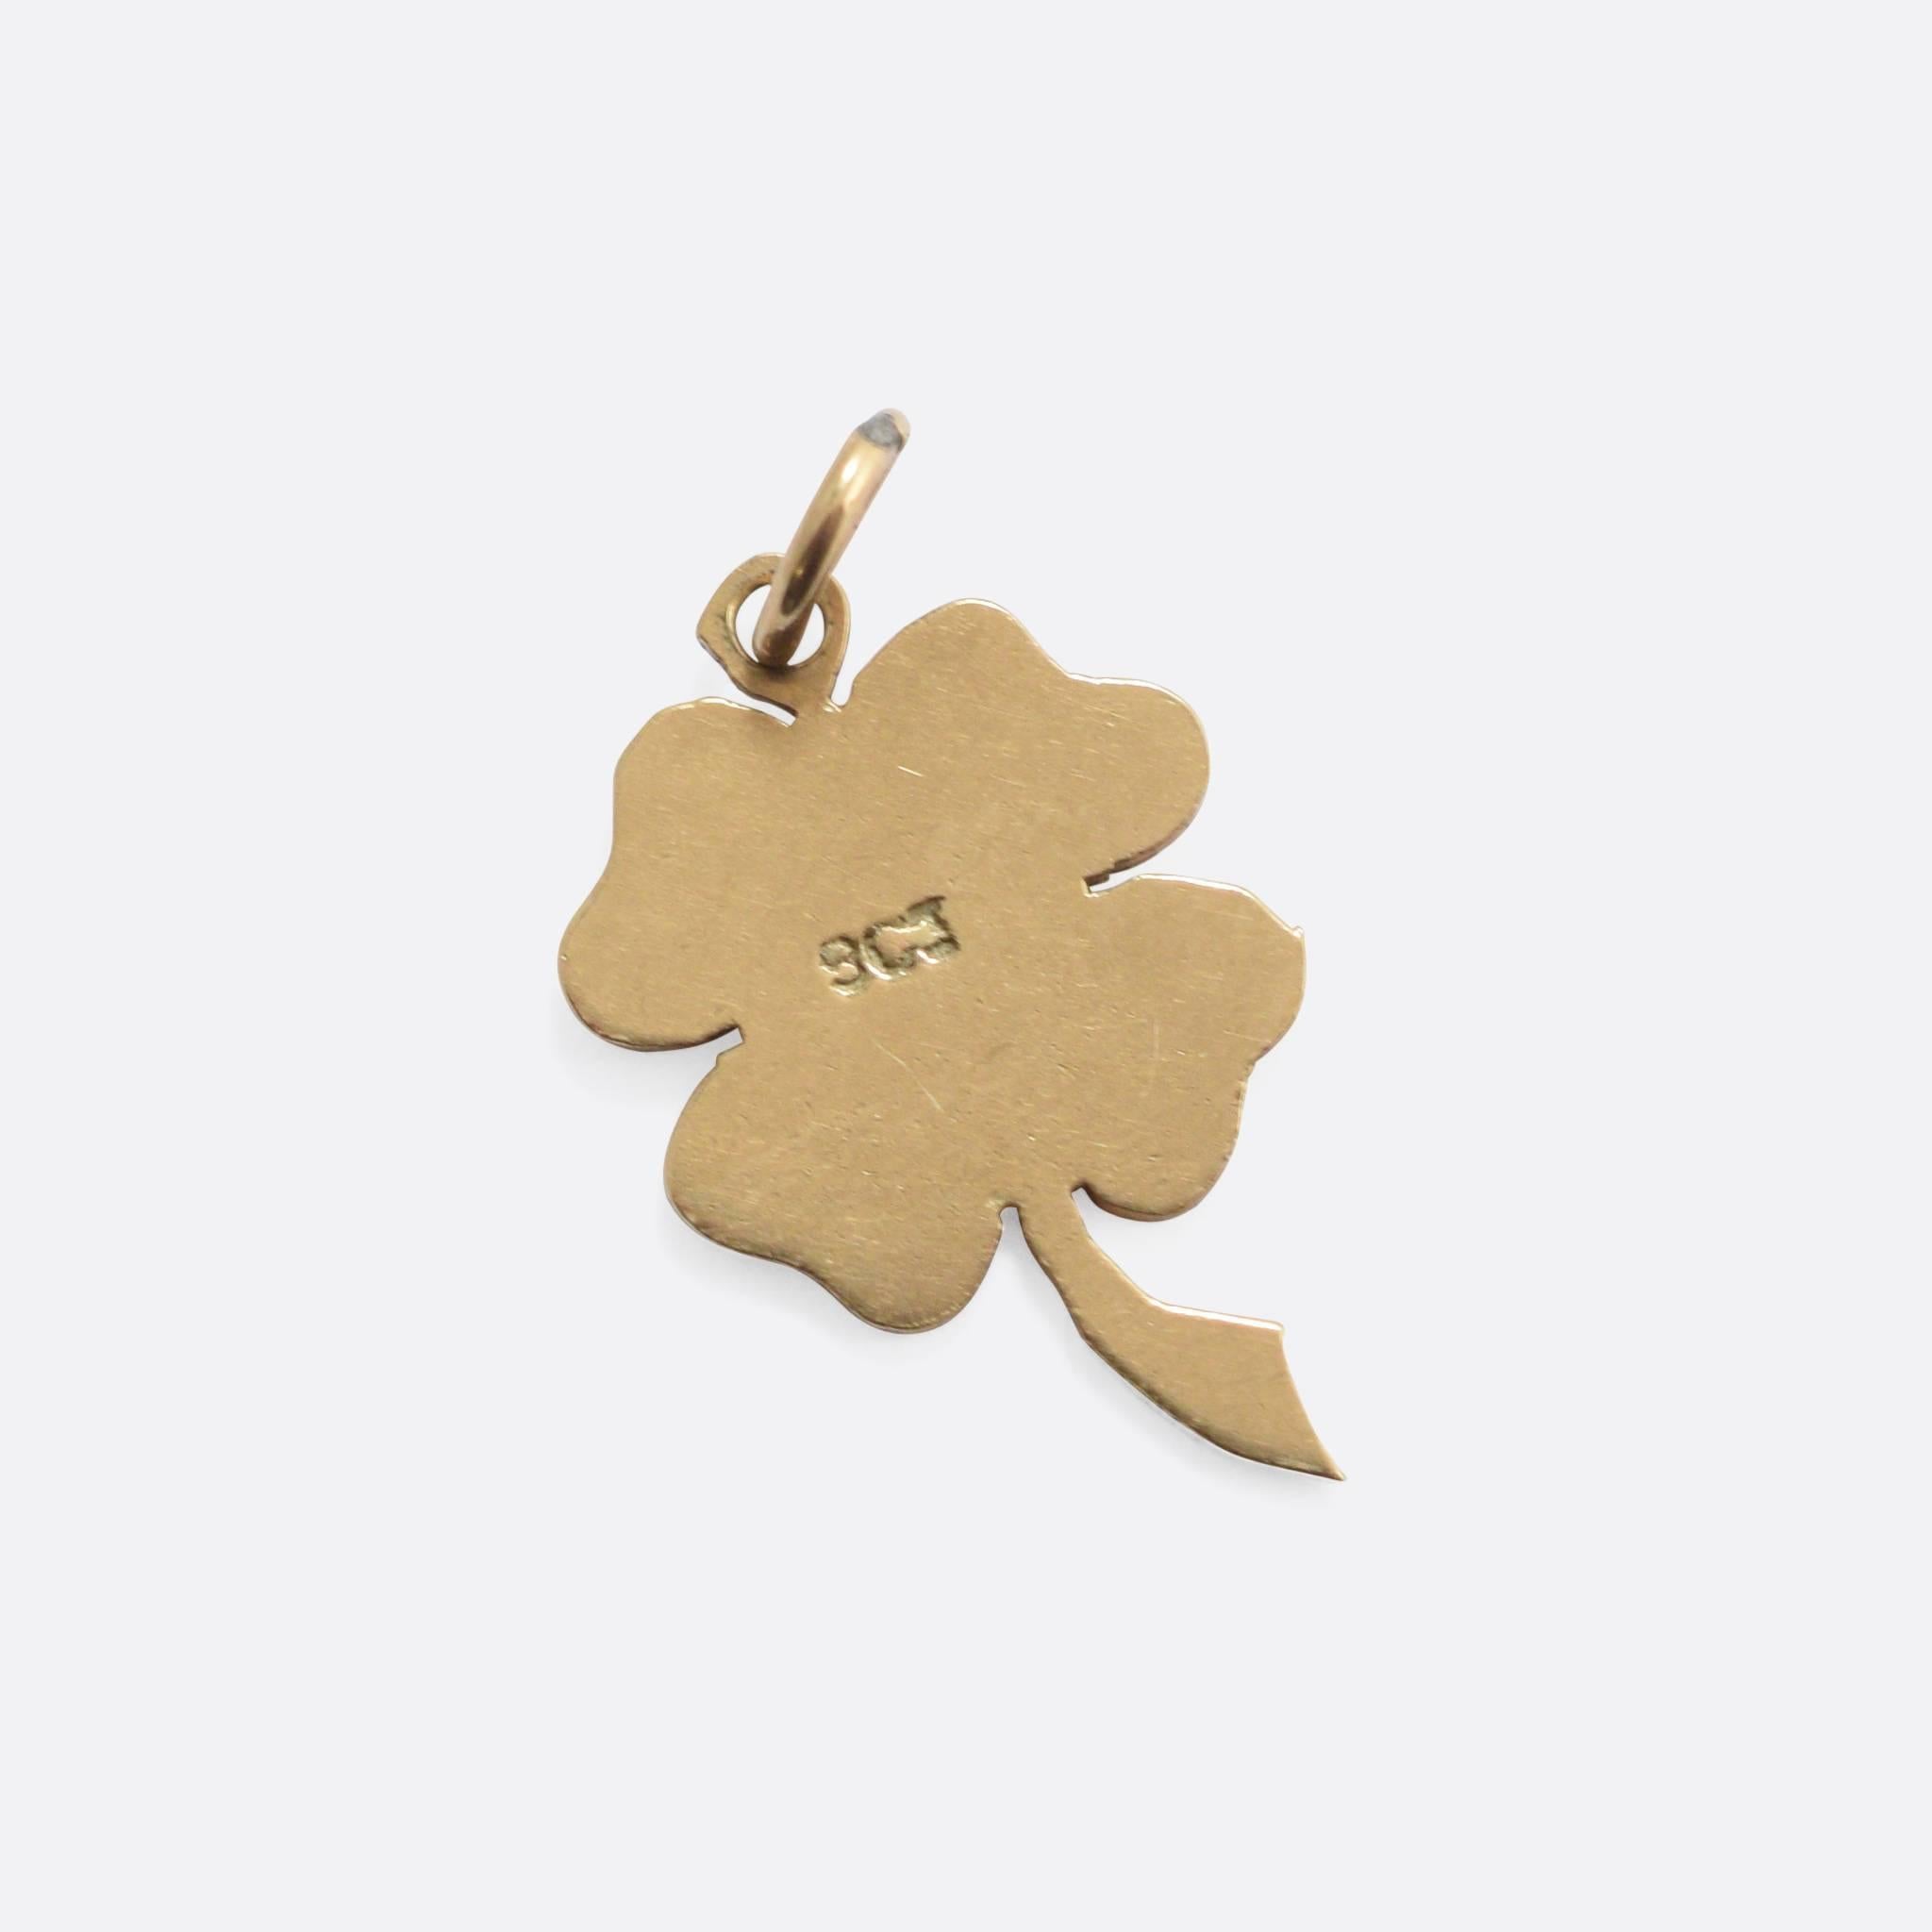 This pretty little pendant will bring the wearer good luck. It's modelled as a rare four-leaf clover, a genetic mutation means that these particular plants have one extra leaf and are therefore much rarer than their three-leaved cousins. Not to be